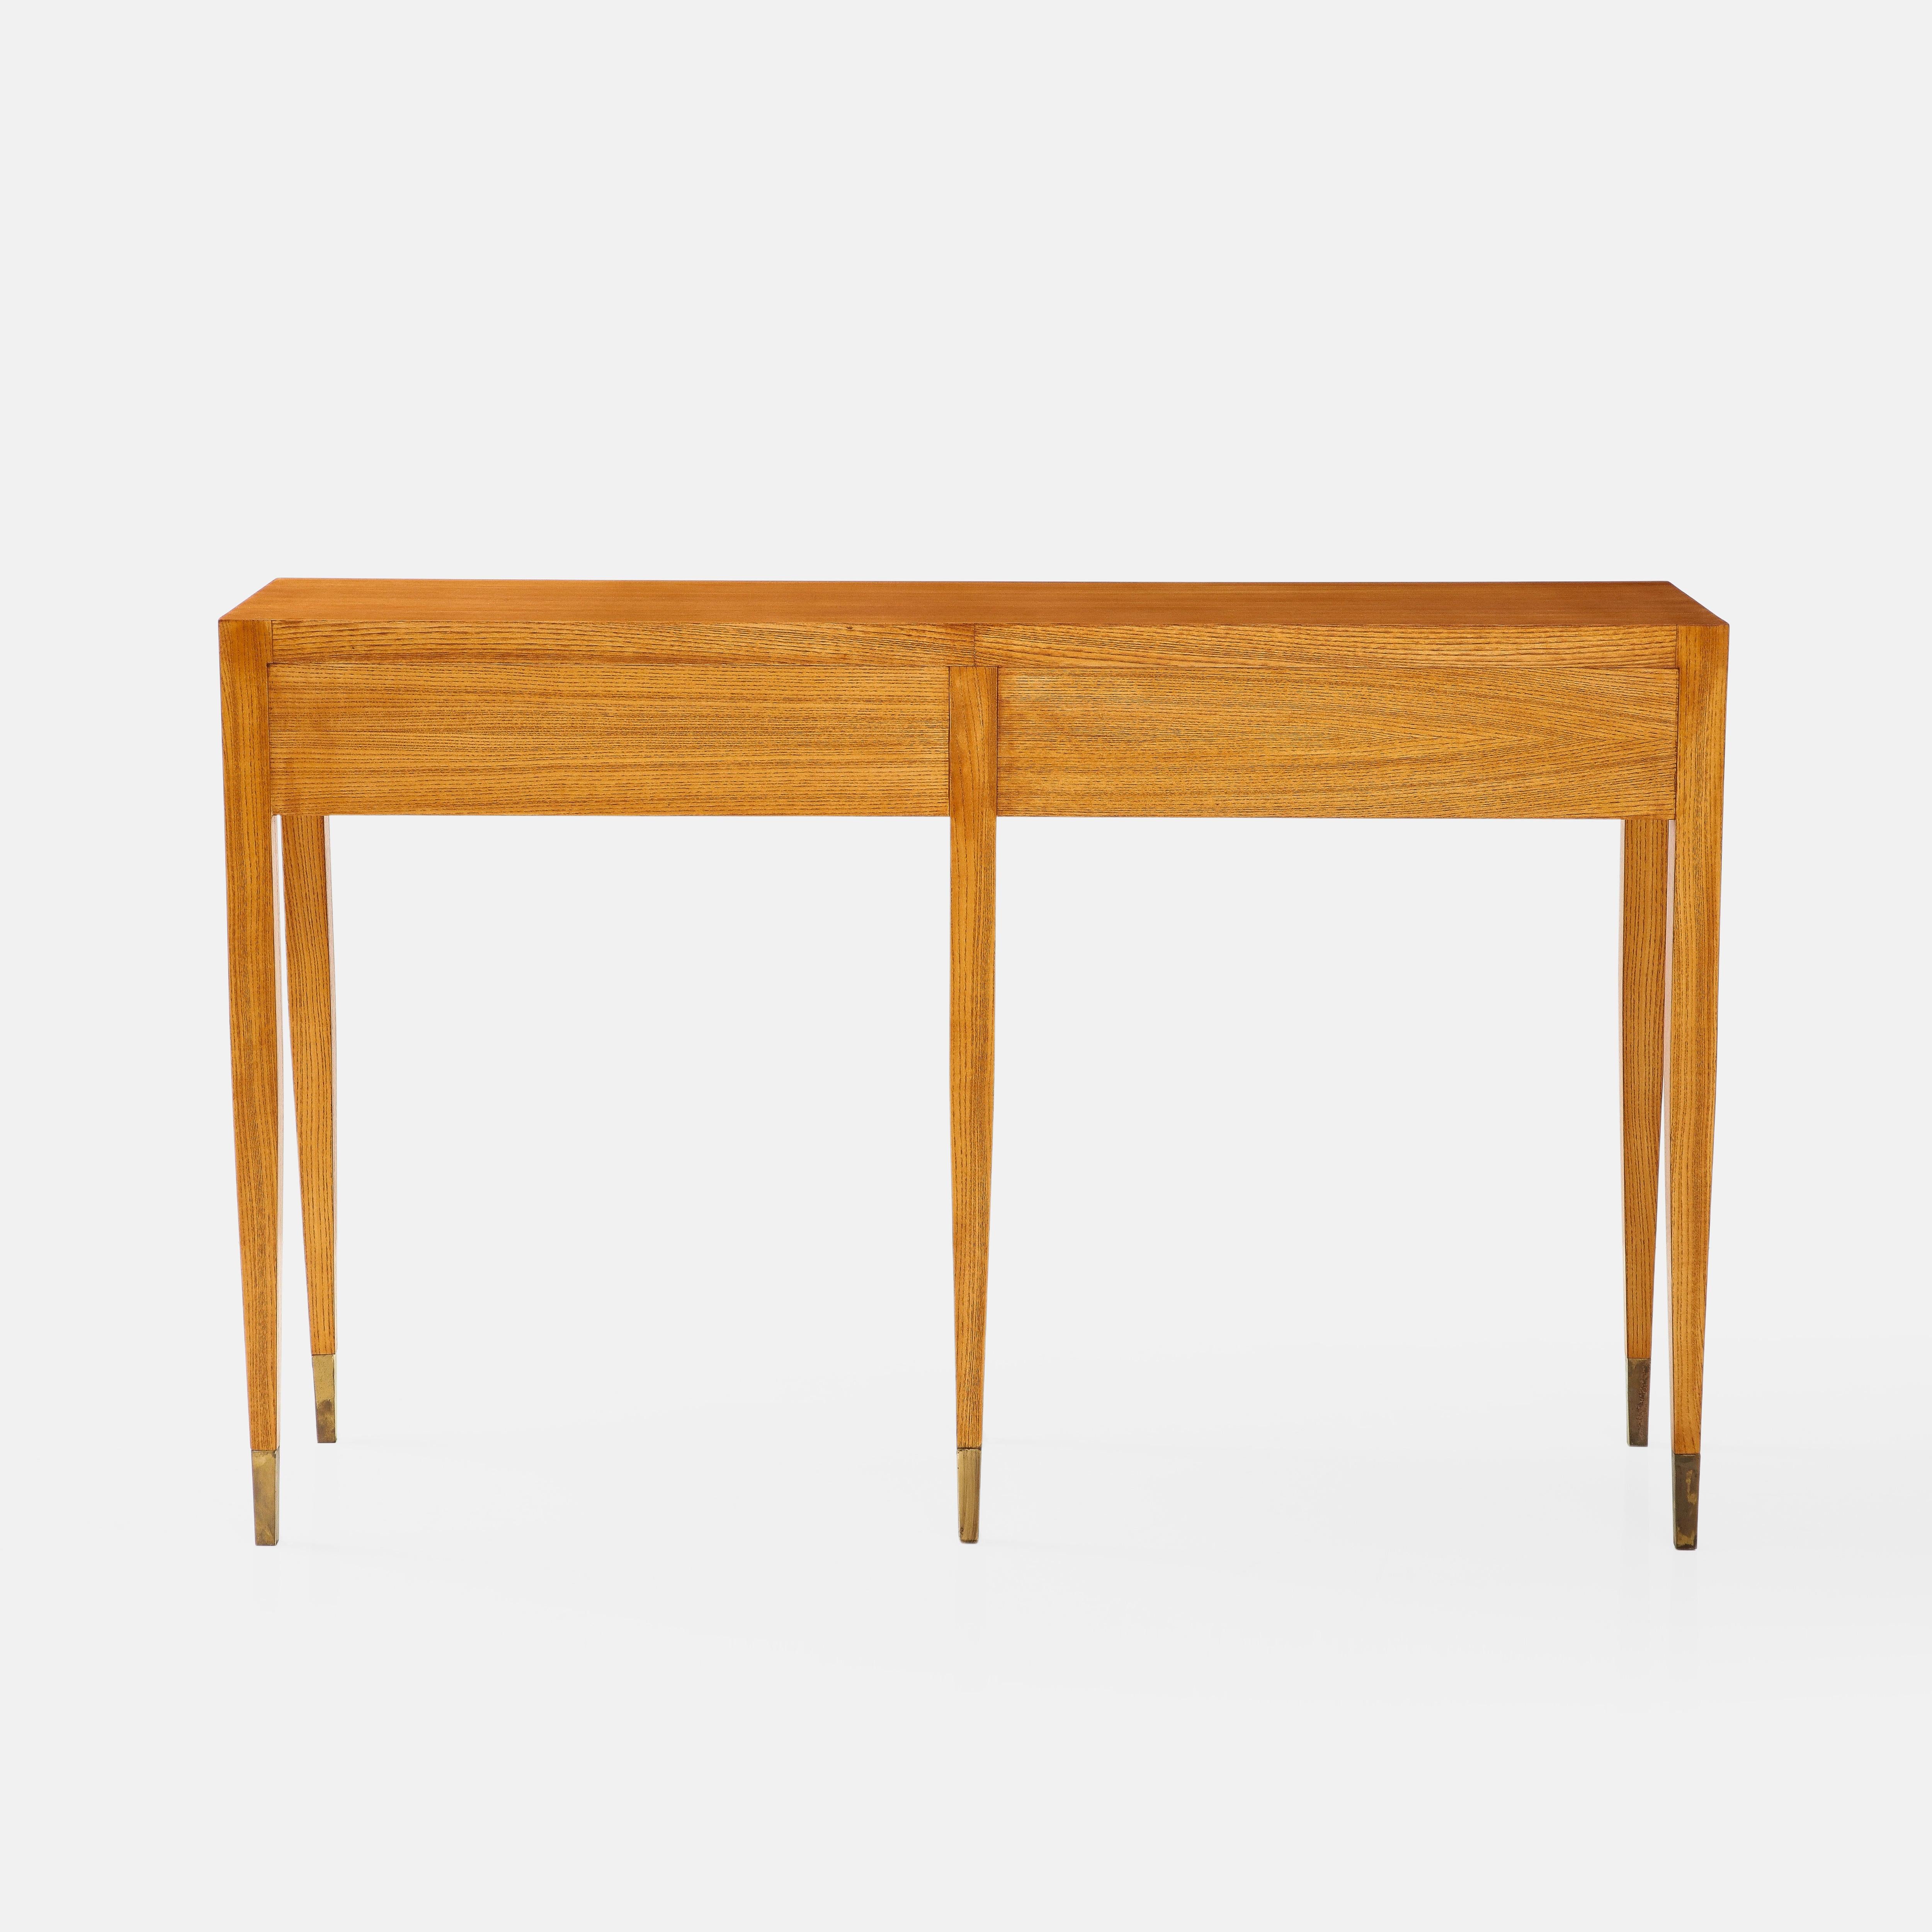 Gio Ponti for Giordano Chiesa Rare Pair of Ash Wood Consoles, Italy, 1950s In Good Condition For Sale In New York, NY